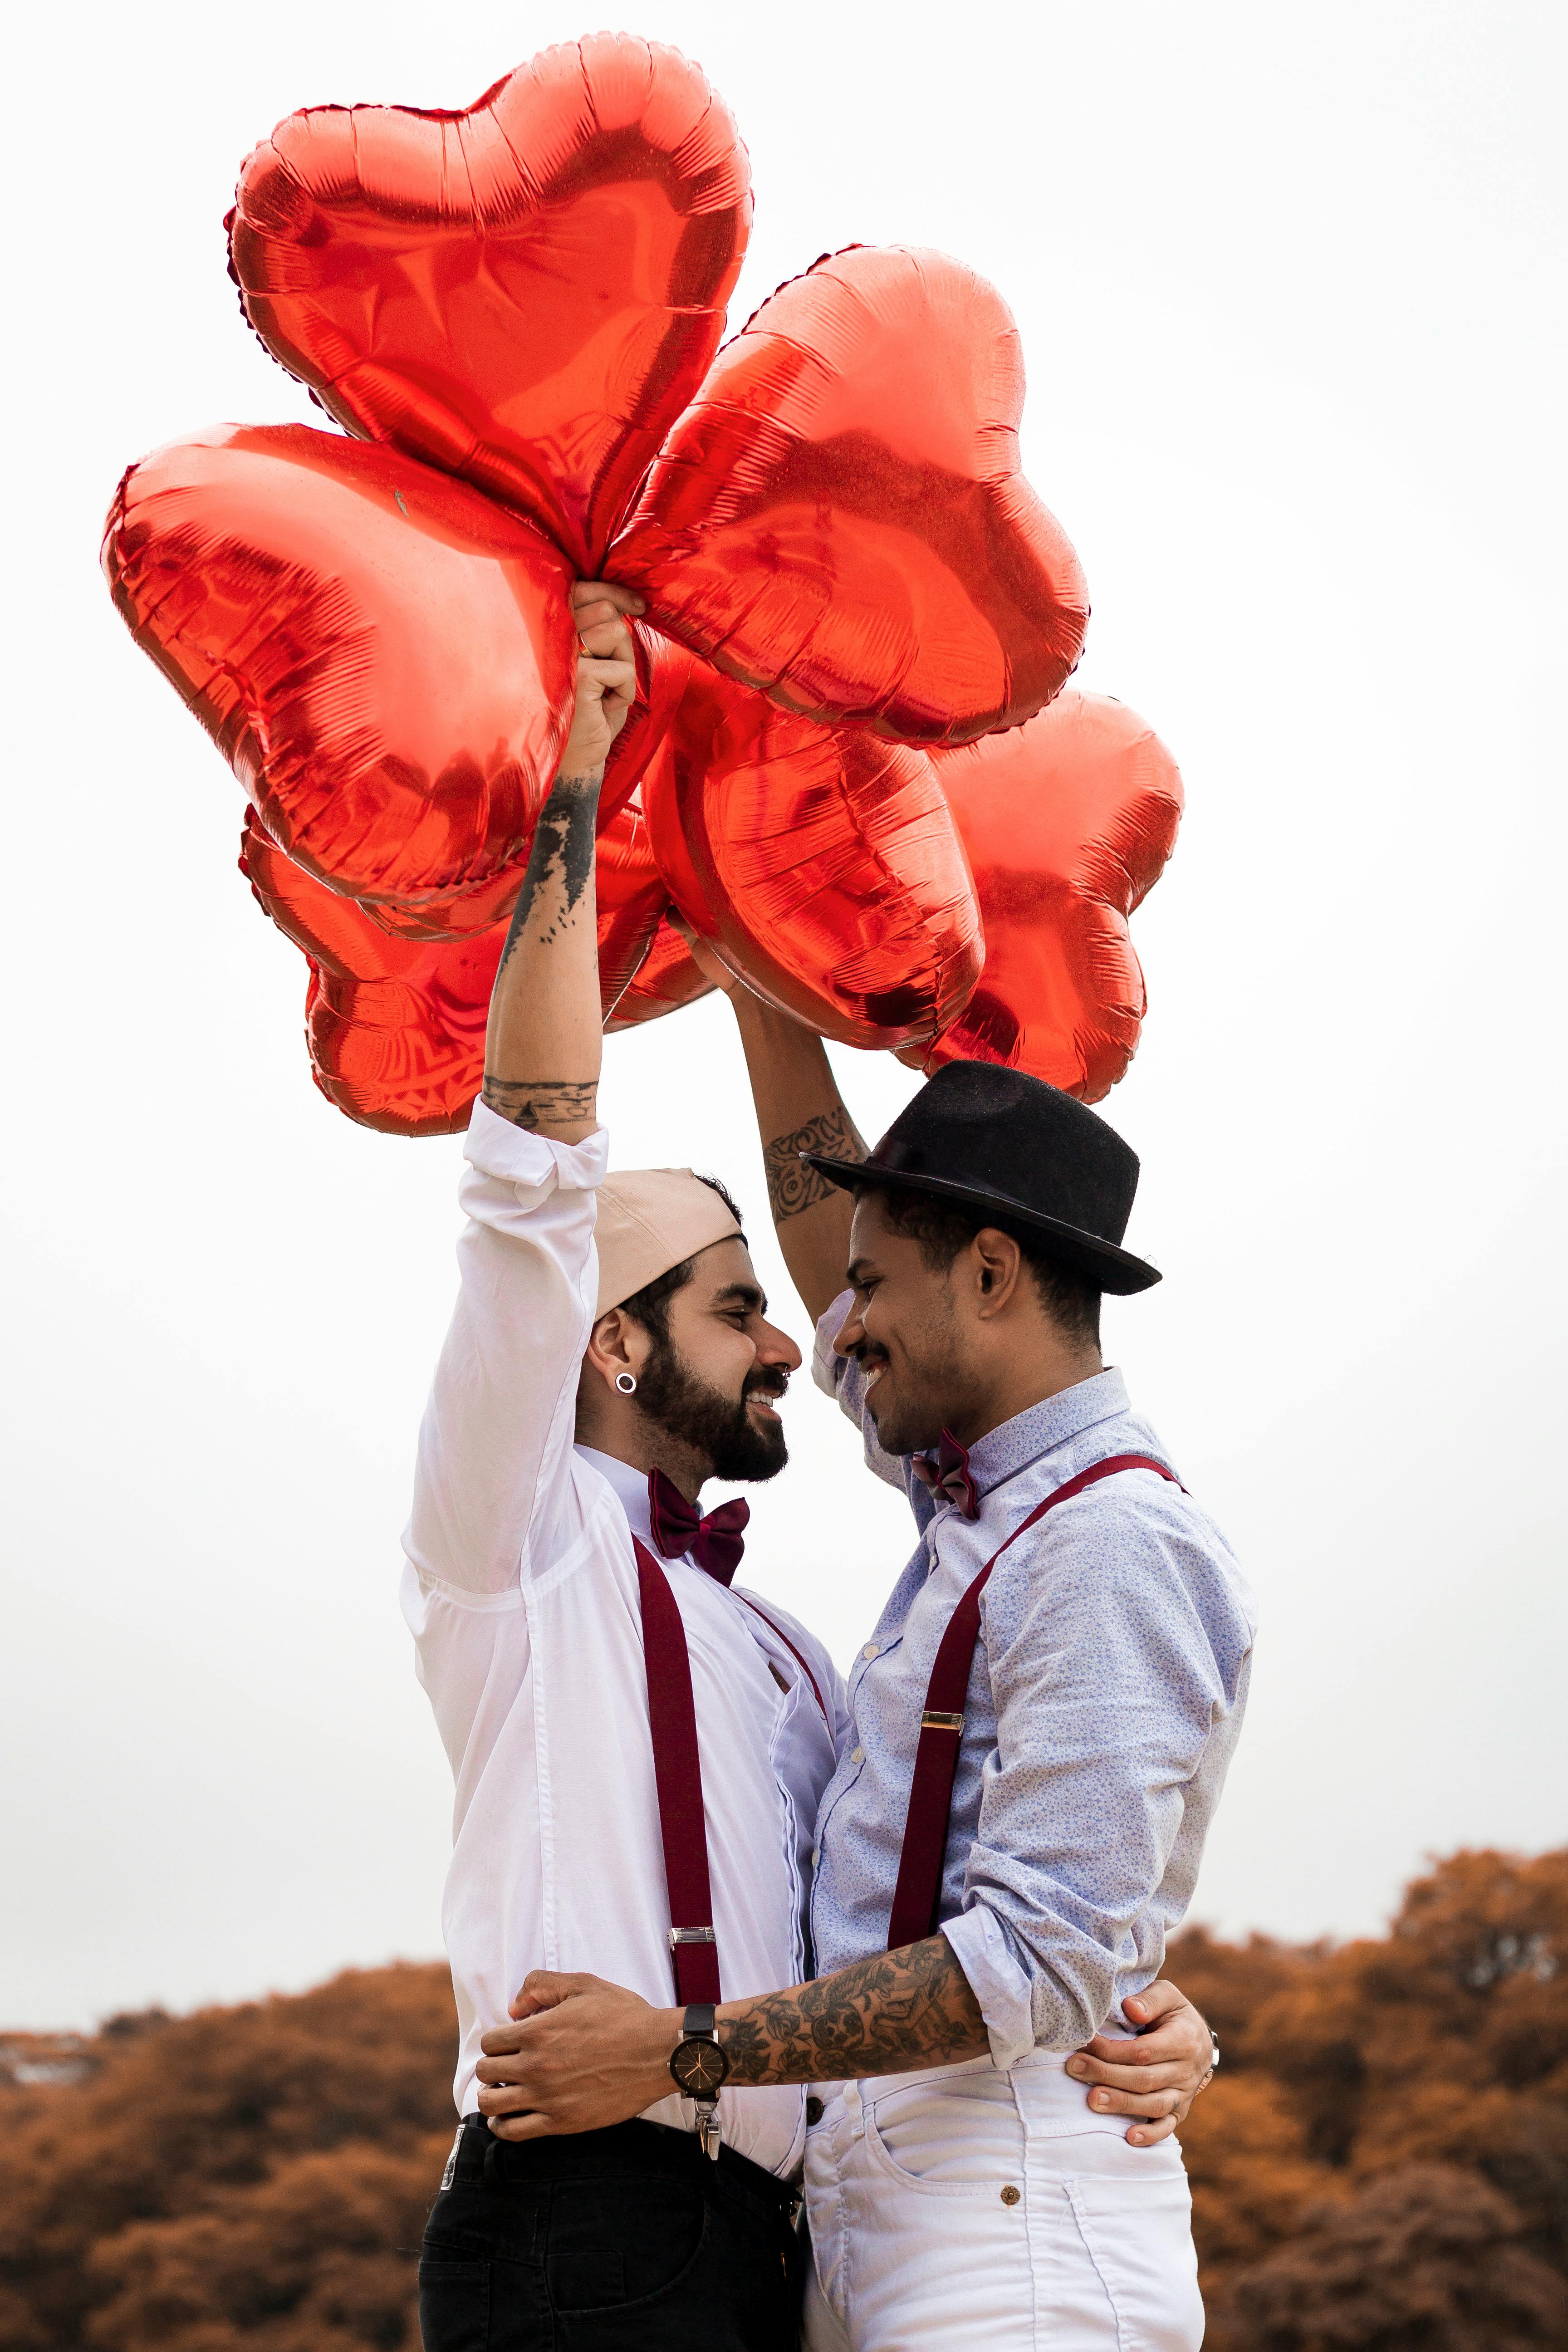 Two men embracing while holding heart balloons | Source: Pexels